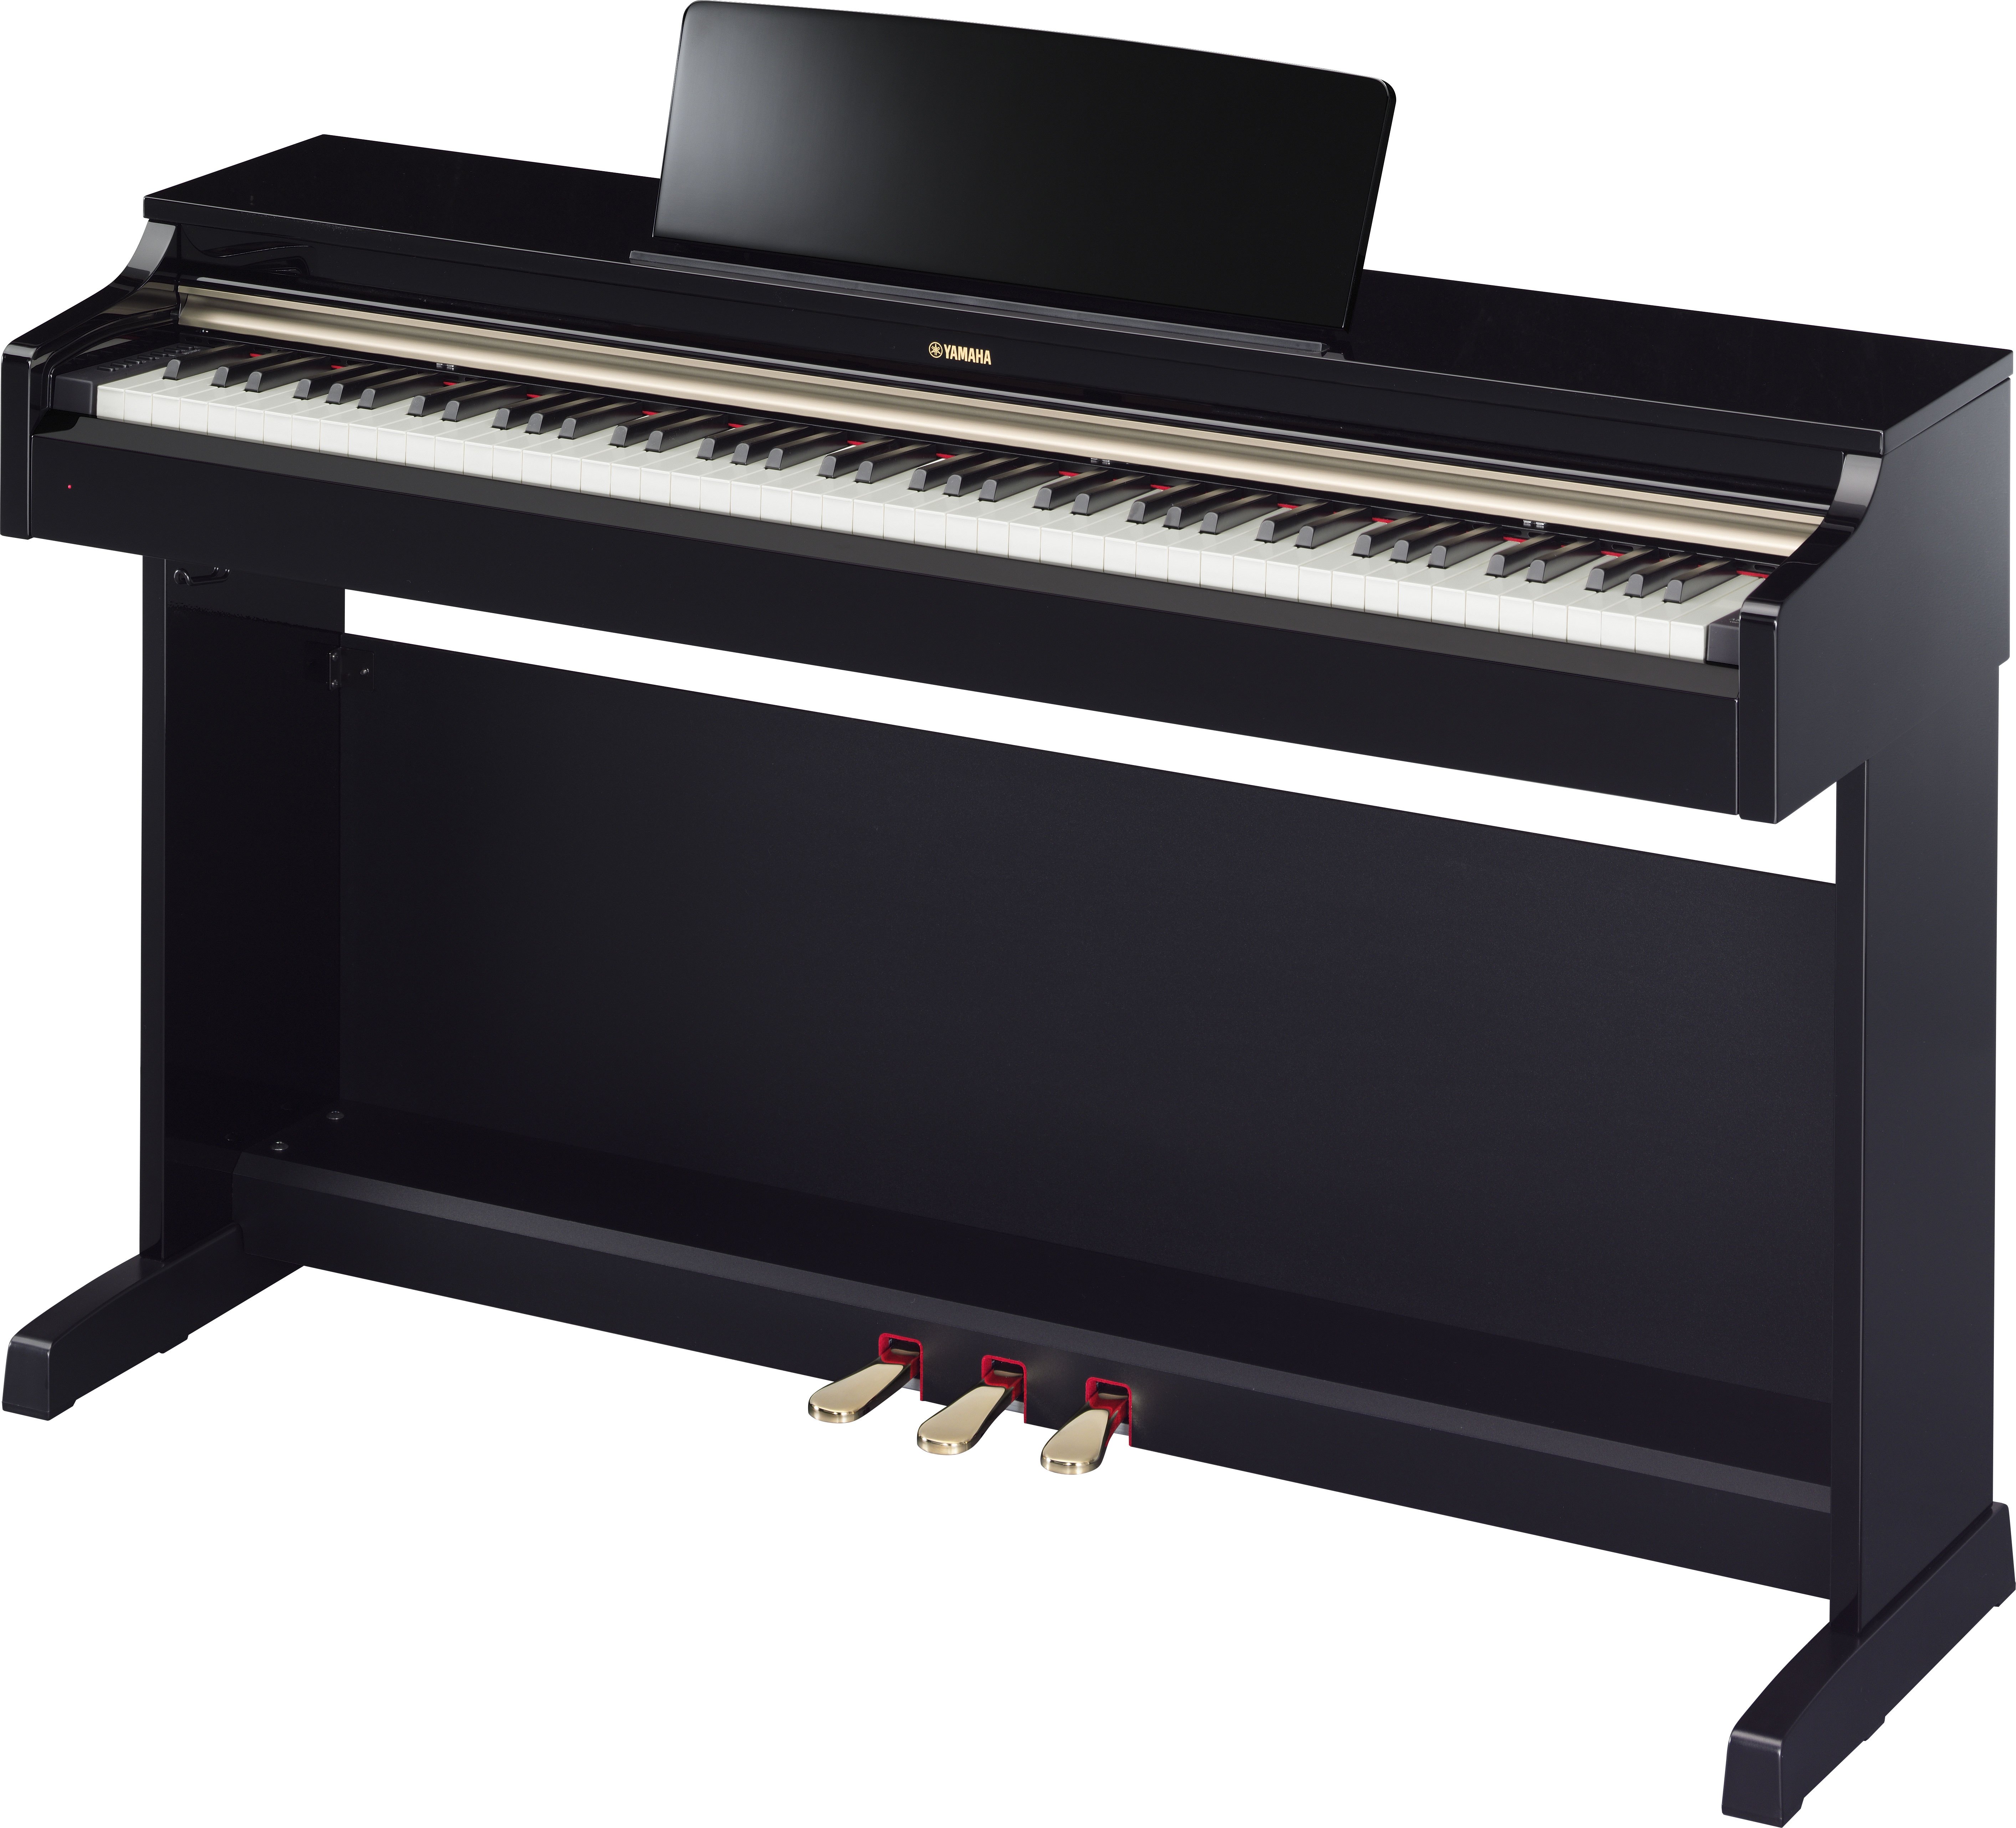 YDP-162 - Overview - ARIUS - Pianos - Musical Instruments ...